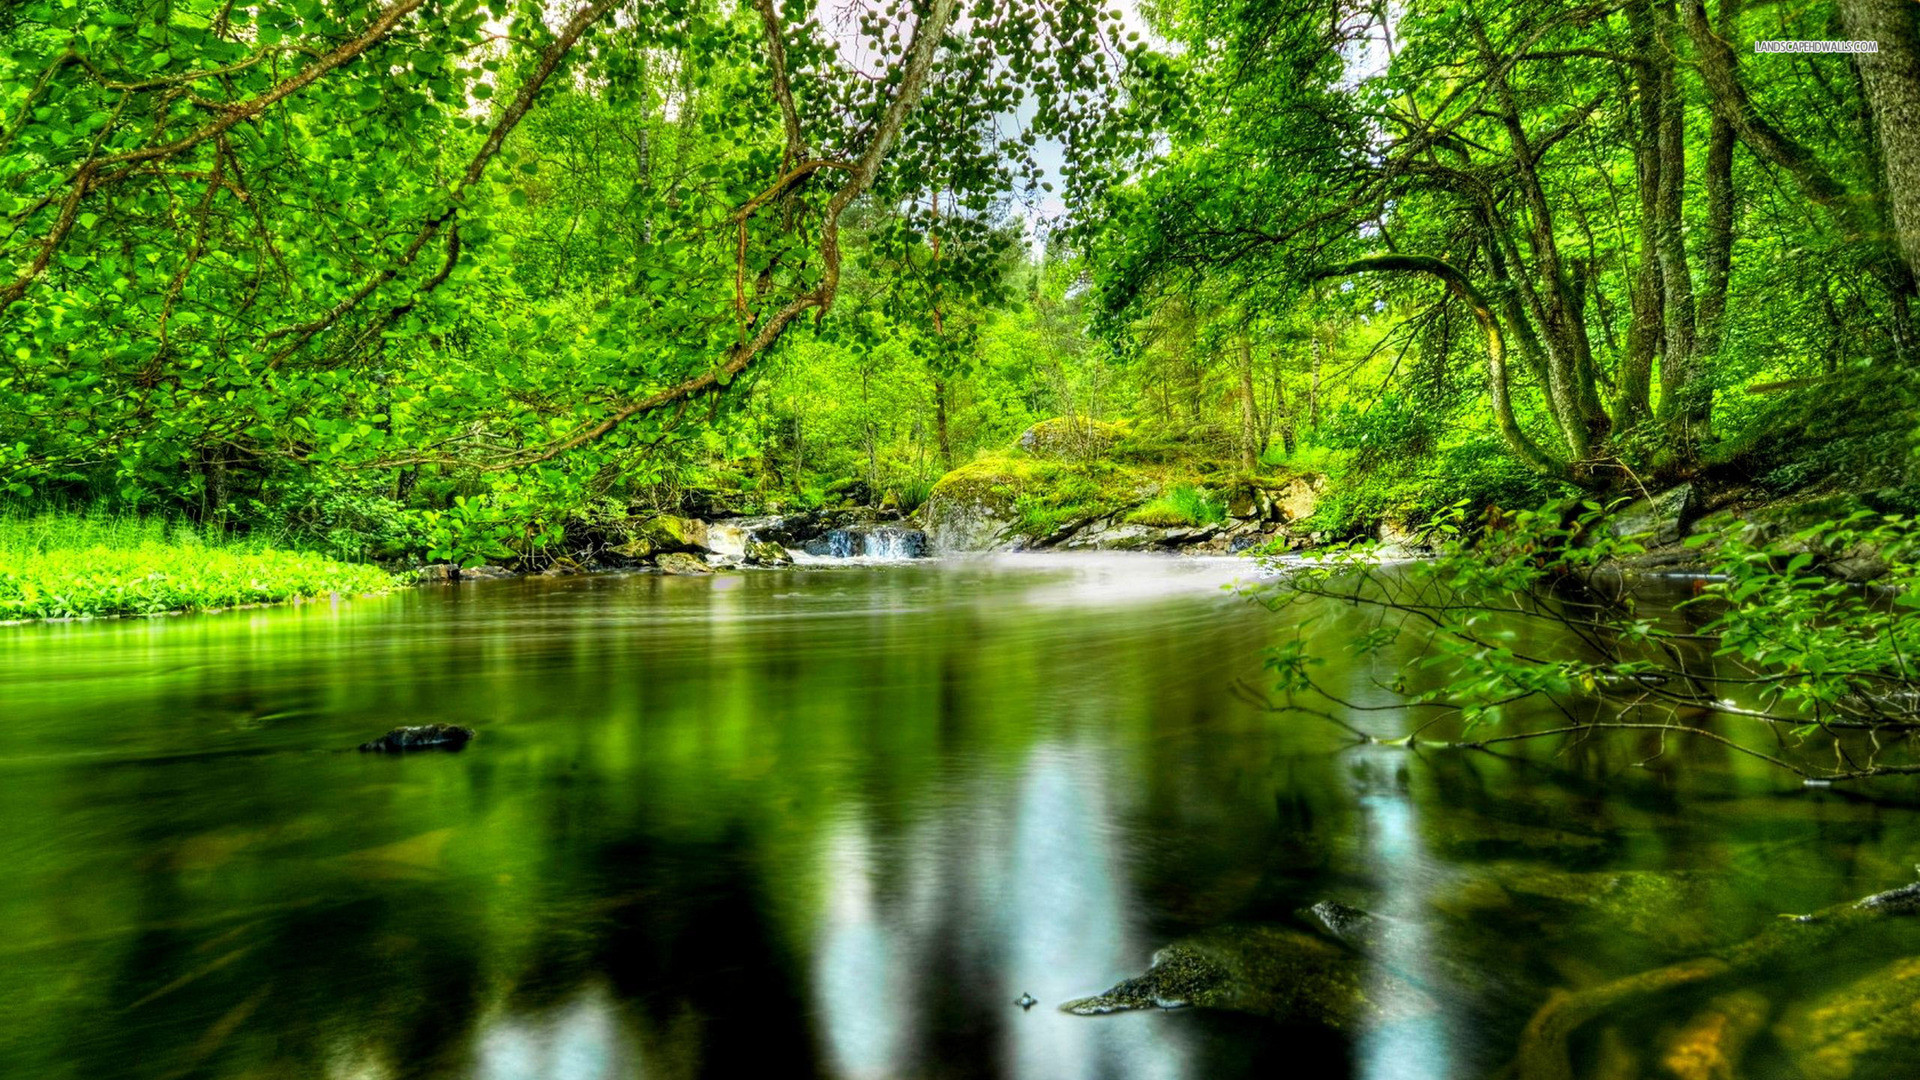 1920x1080 hd-forest-river-nature-wallpapers-.jpg (JPEG Image